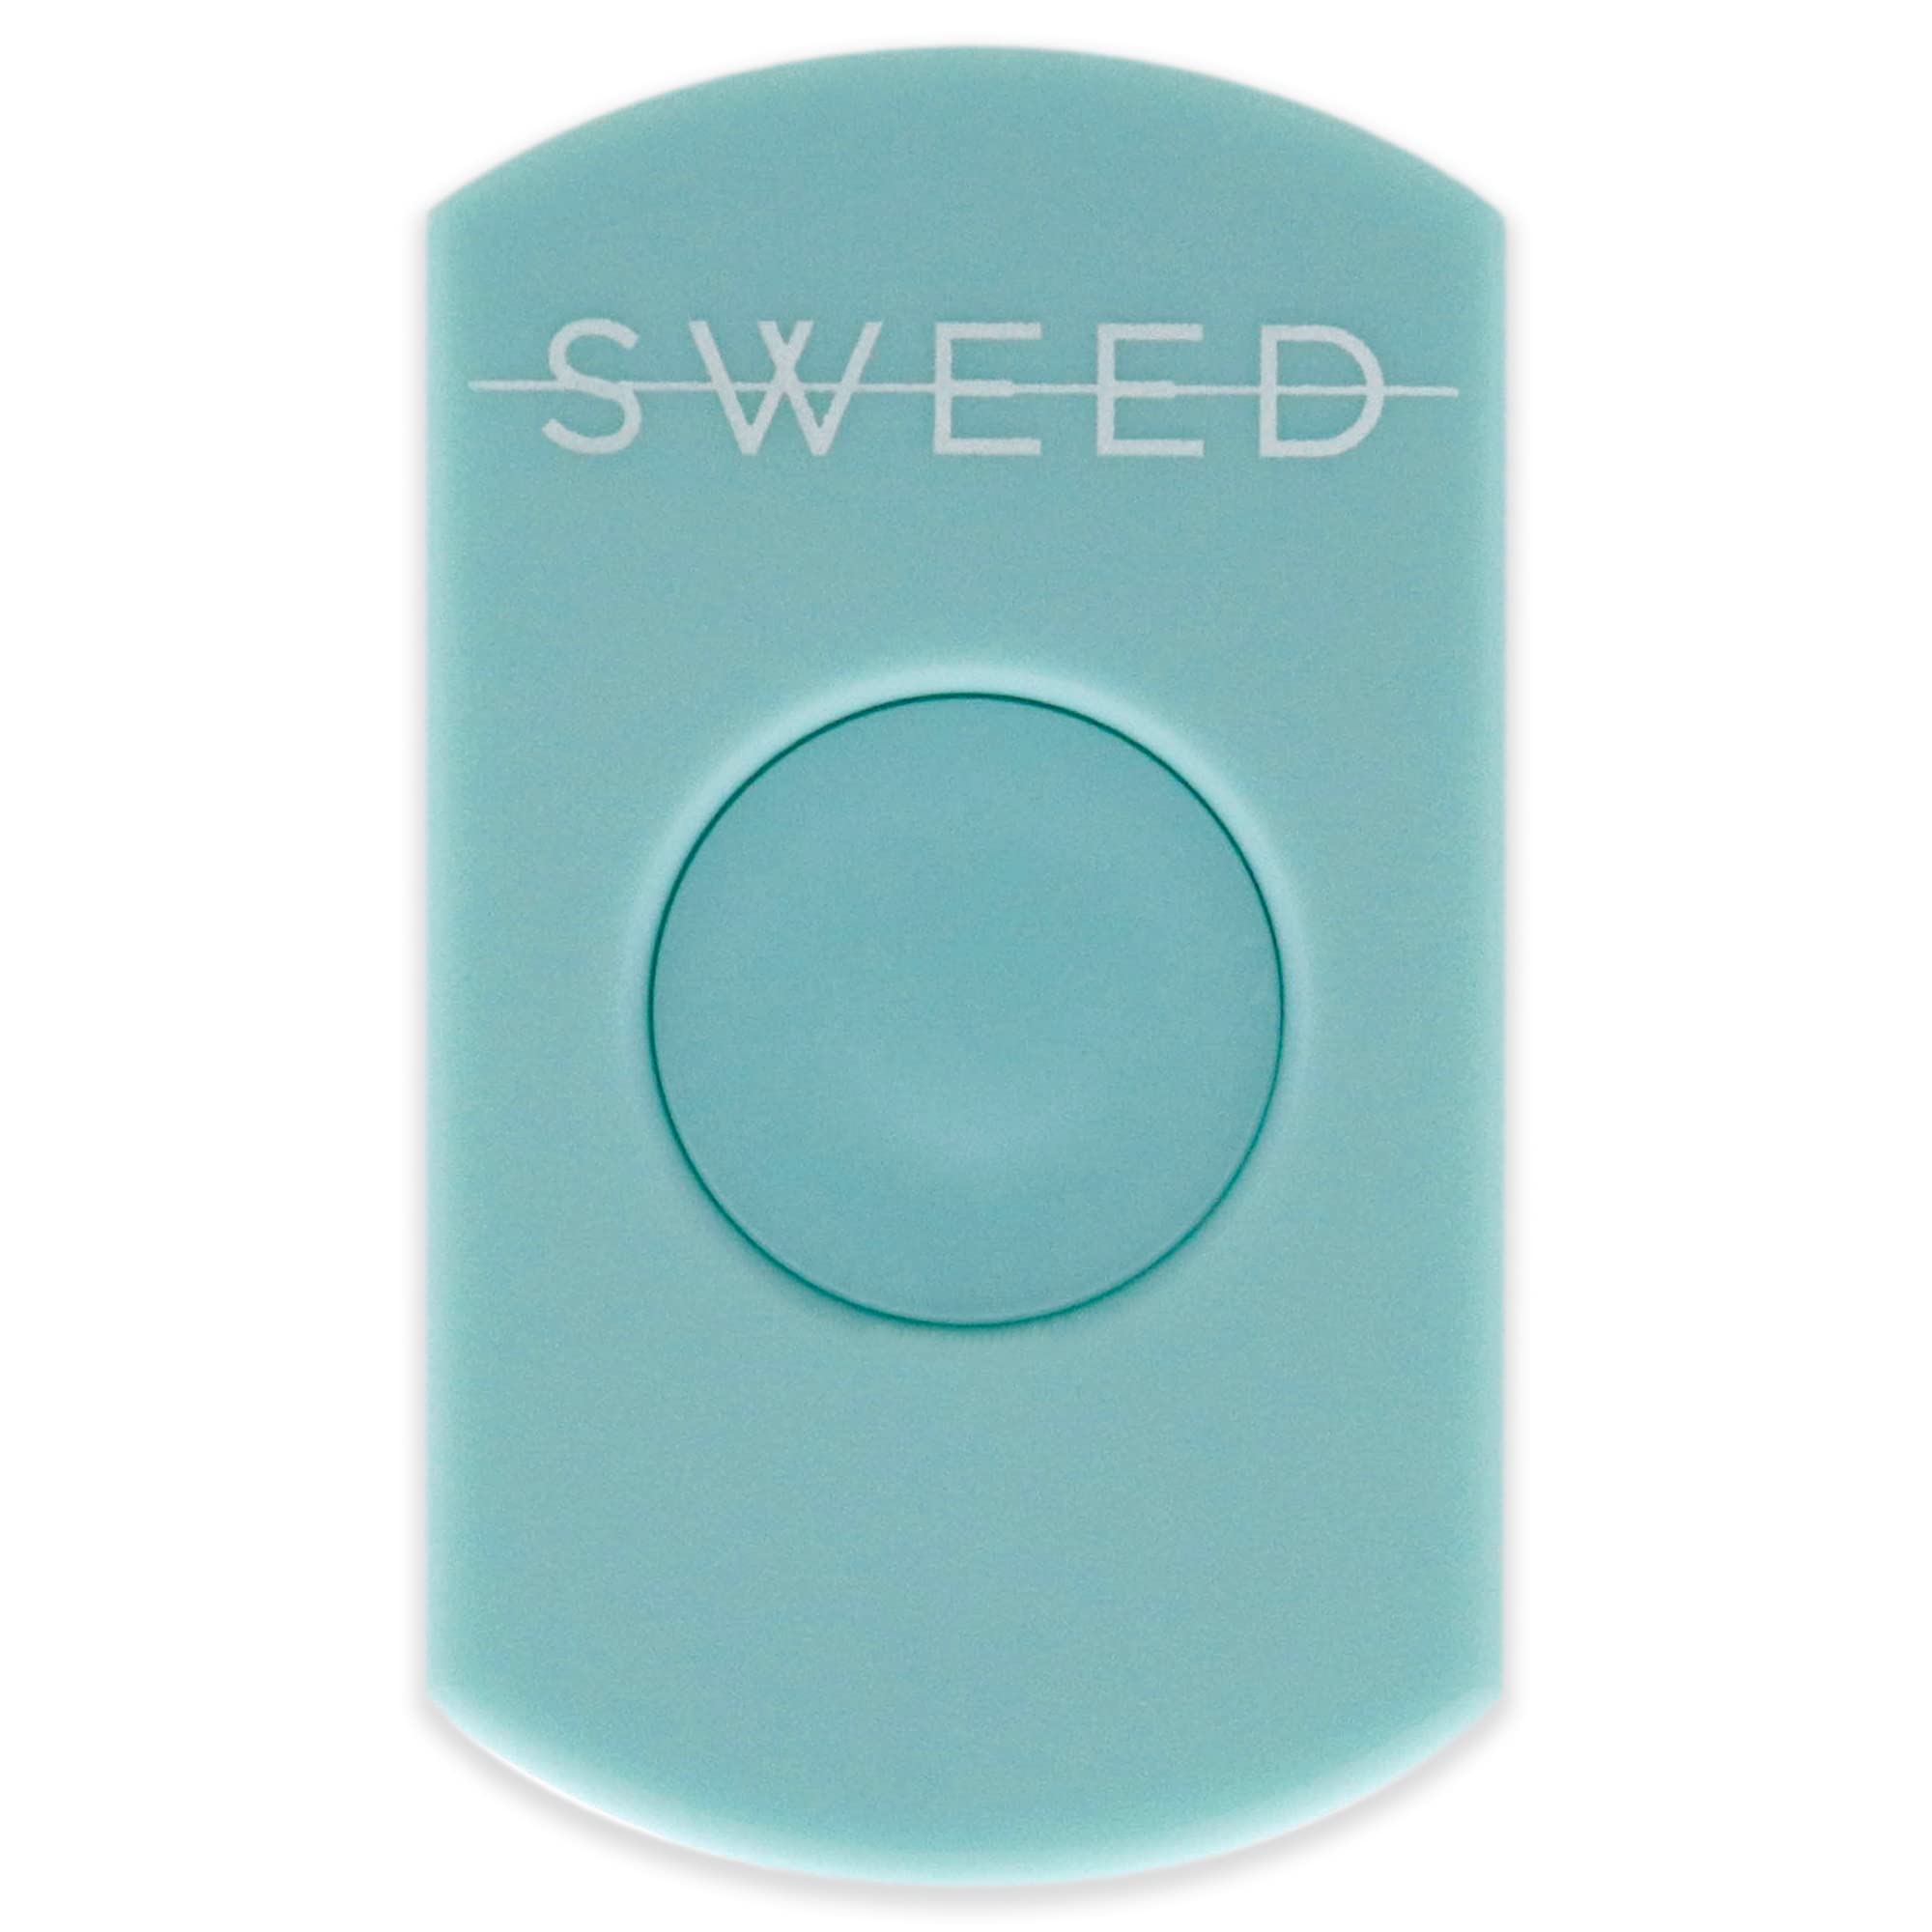 Sweed Pen Sharpener - Travel Friendly Tool with Professional and Mess Free Holder - Stainless Steel & Rust Proof Blades